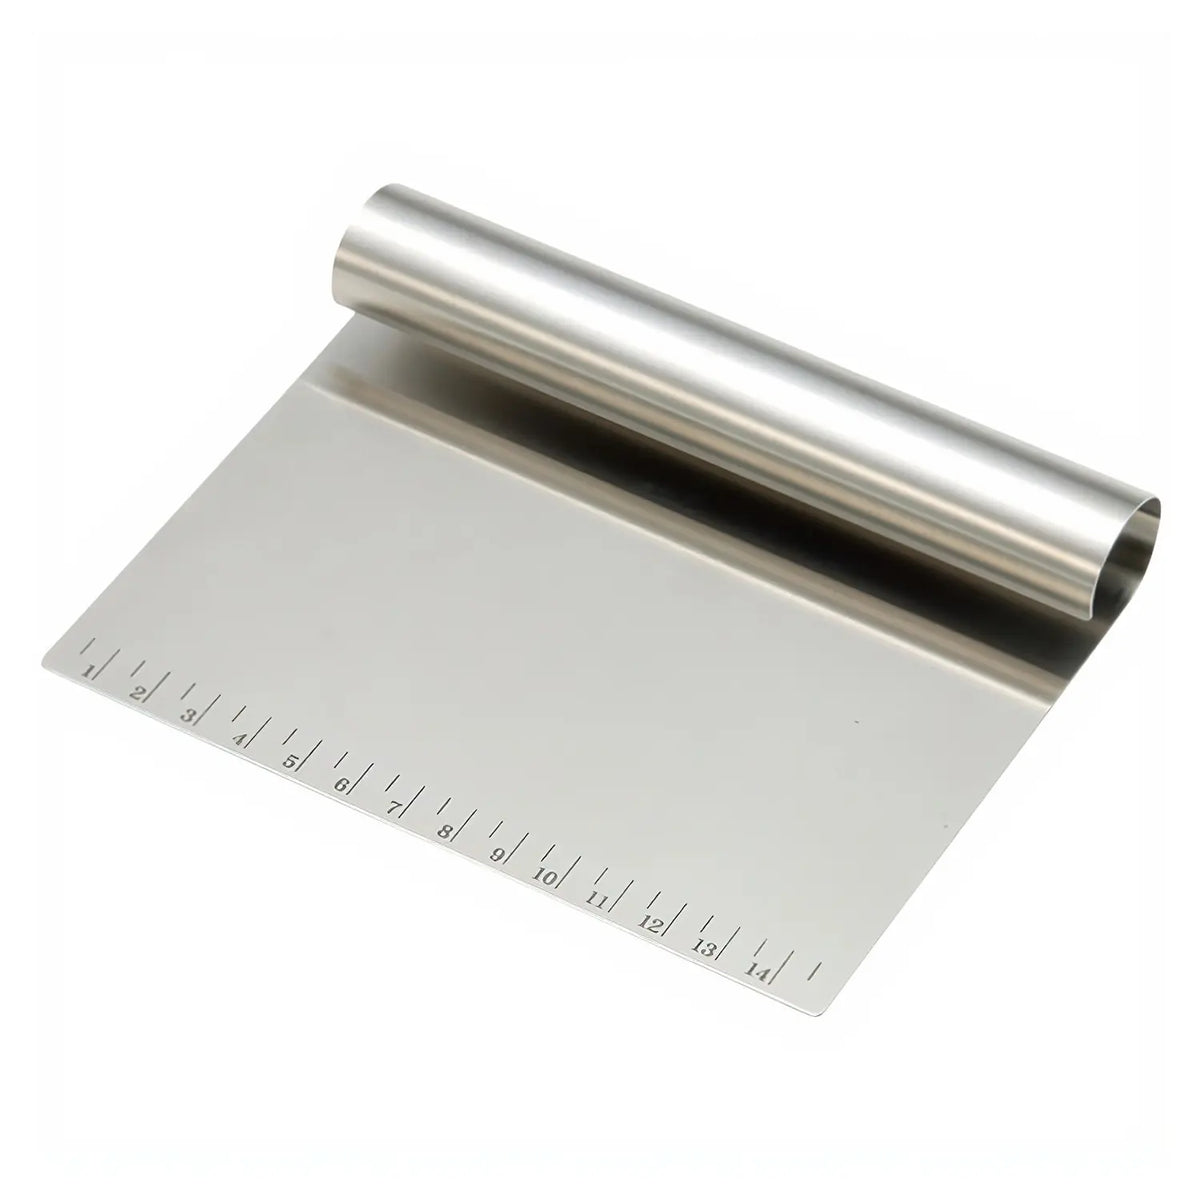 TIGERCROWN Cake Land Stainless Steel Bench Scraper with Scale